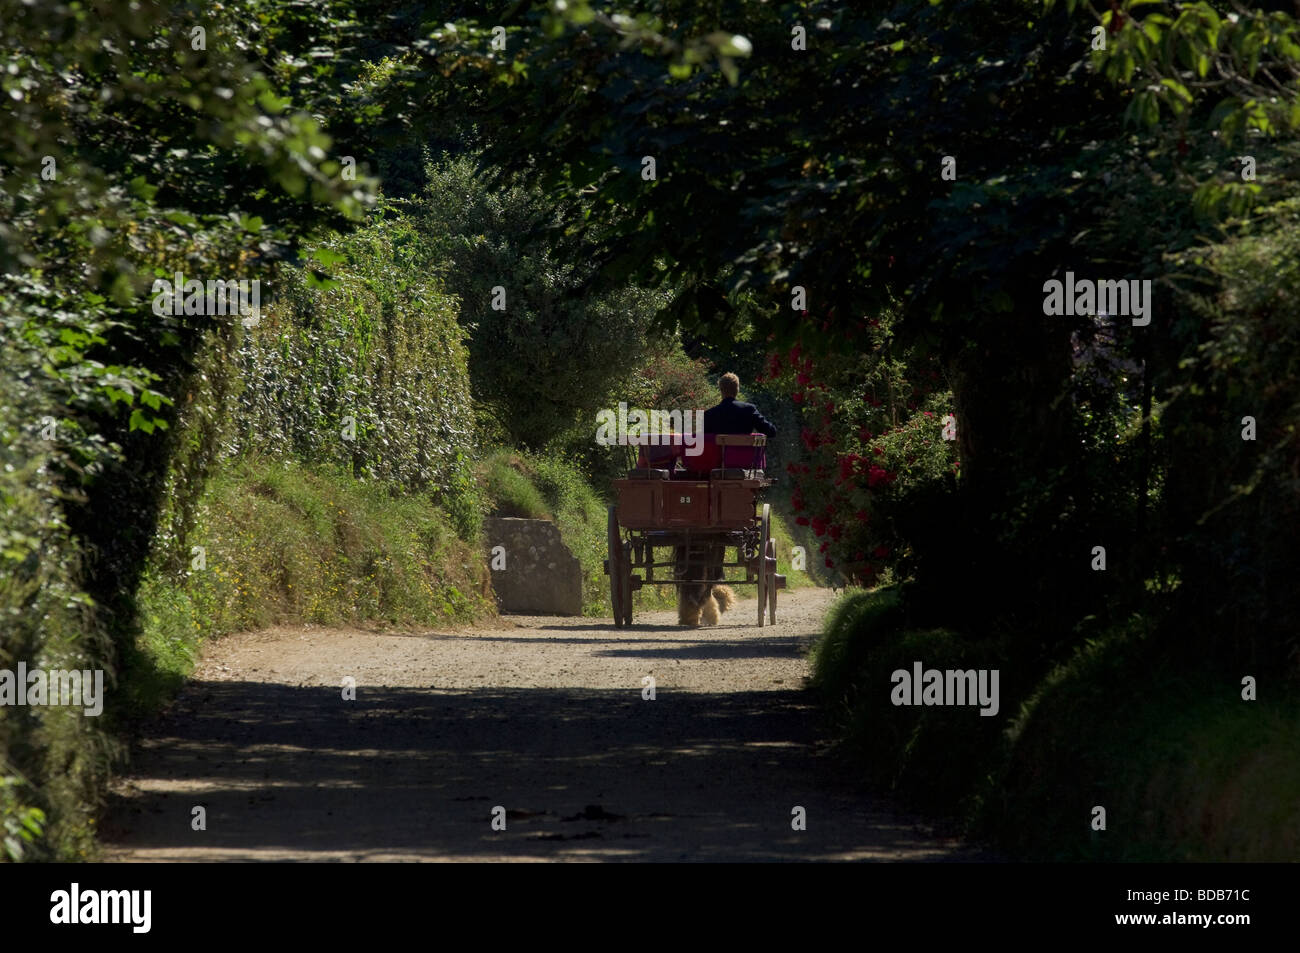 Horse carriage in a country lane, Island of Sark, Channel Islands Stock Photo